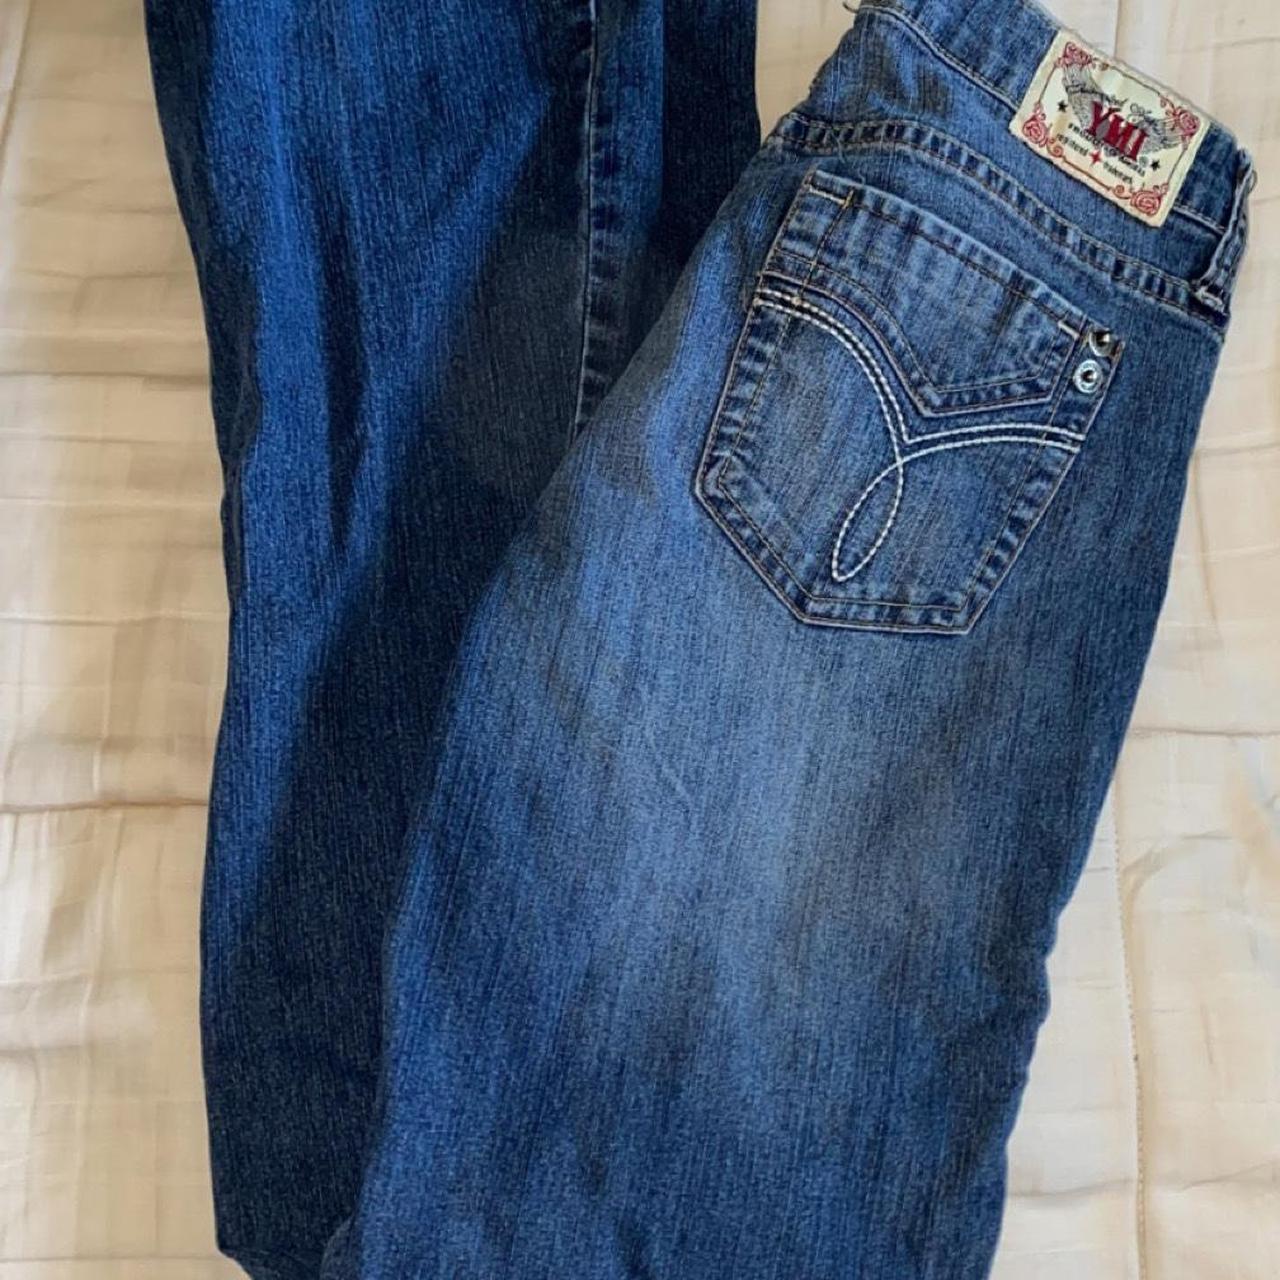 Vintage 2000's ymi jeans Size 7 Accepting offers - Depop